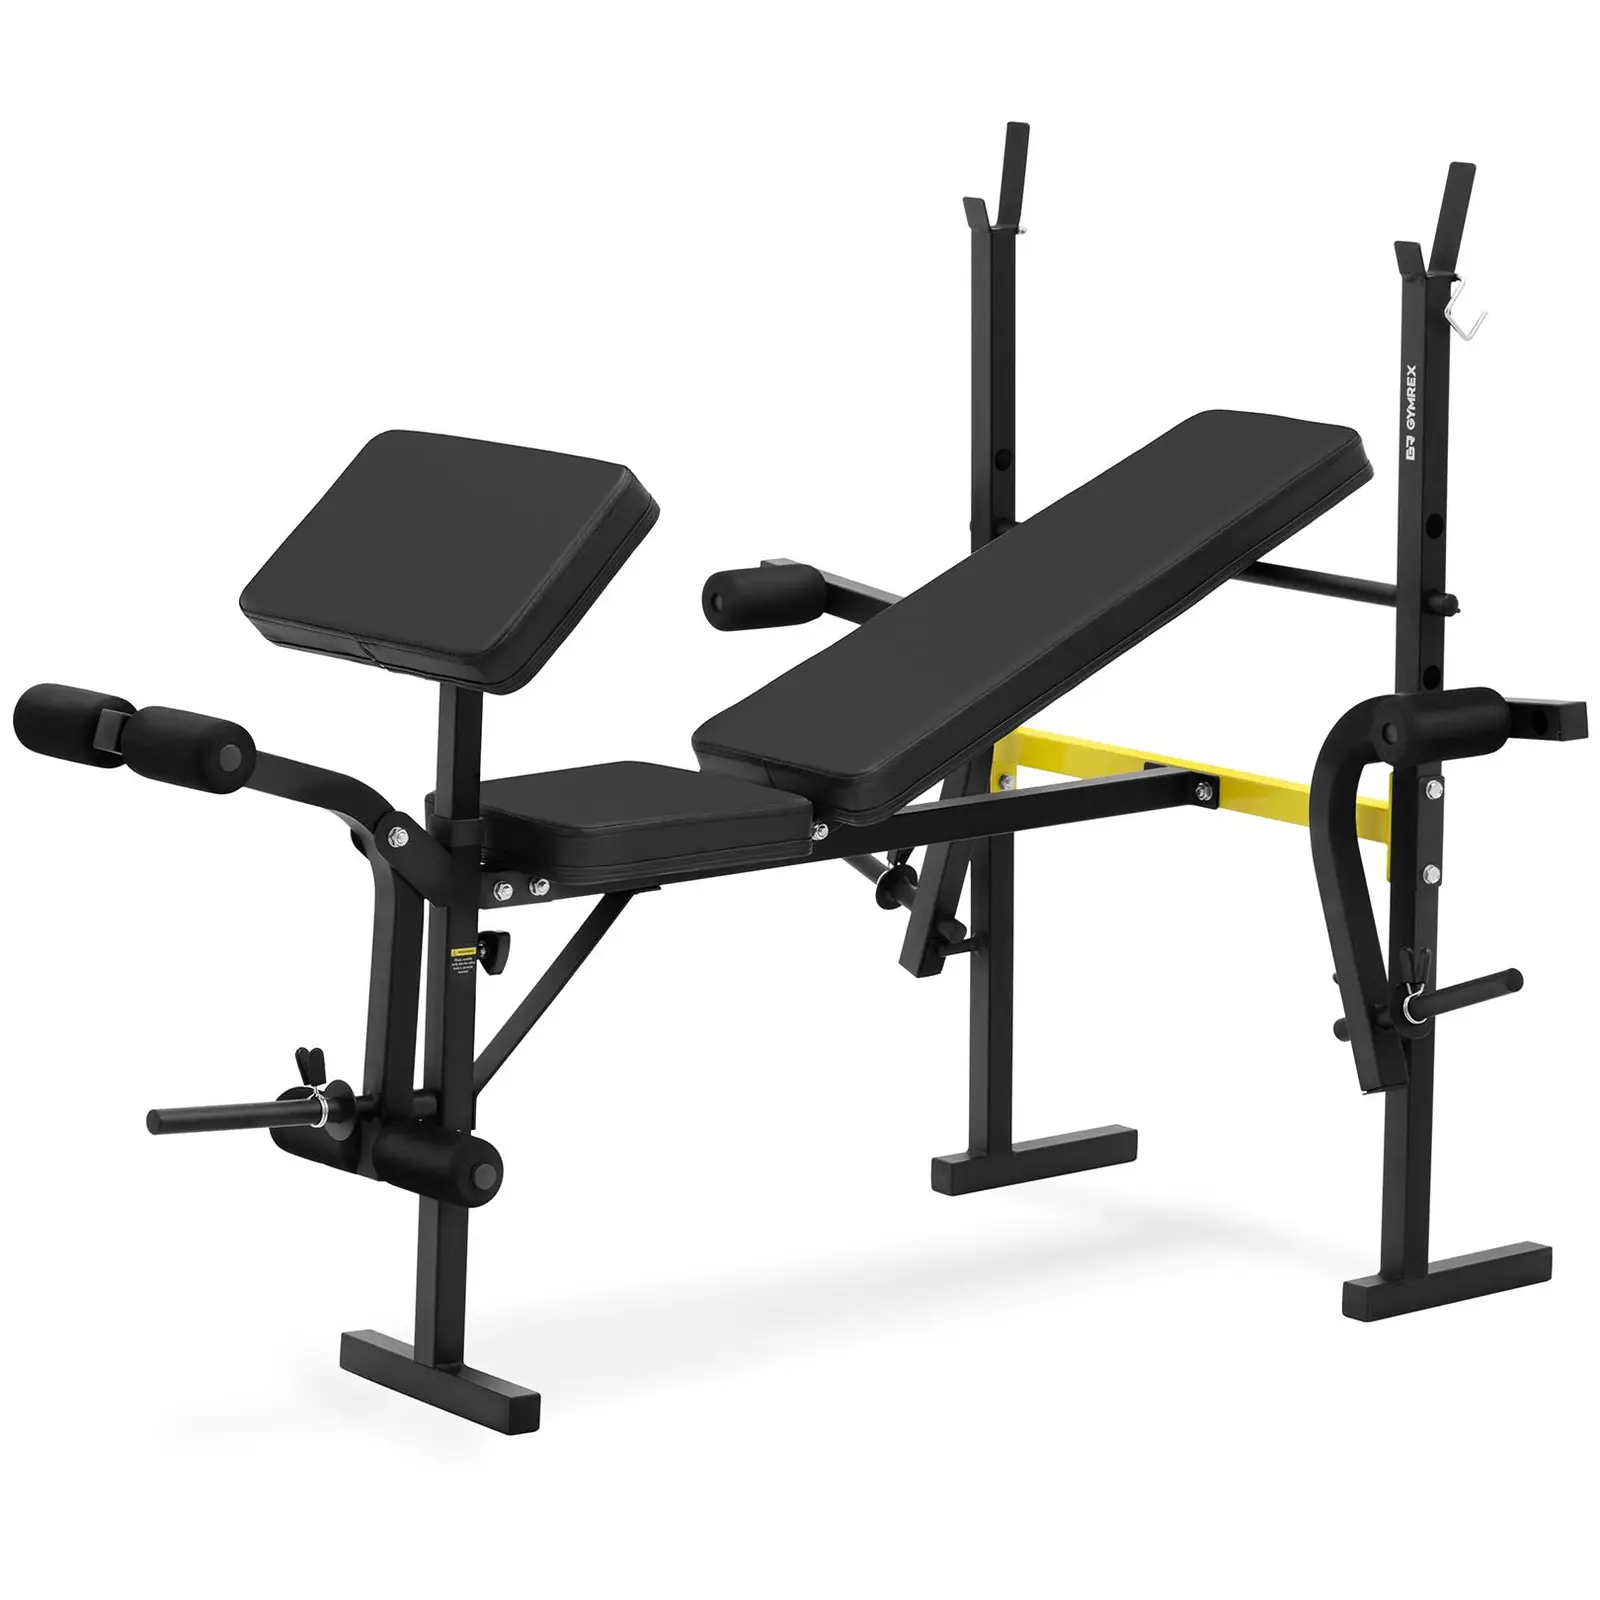 Multifunctional Weight Bench - supports up to 100 kg - adjustable